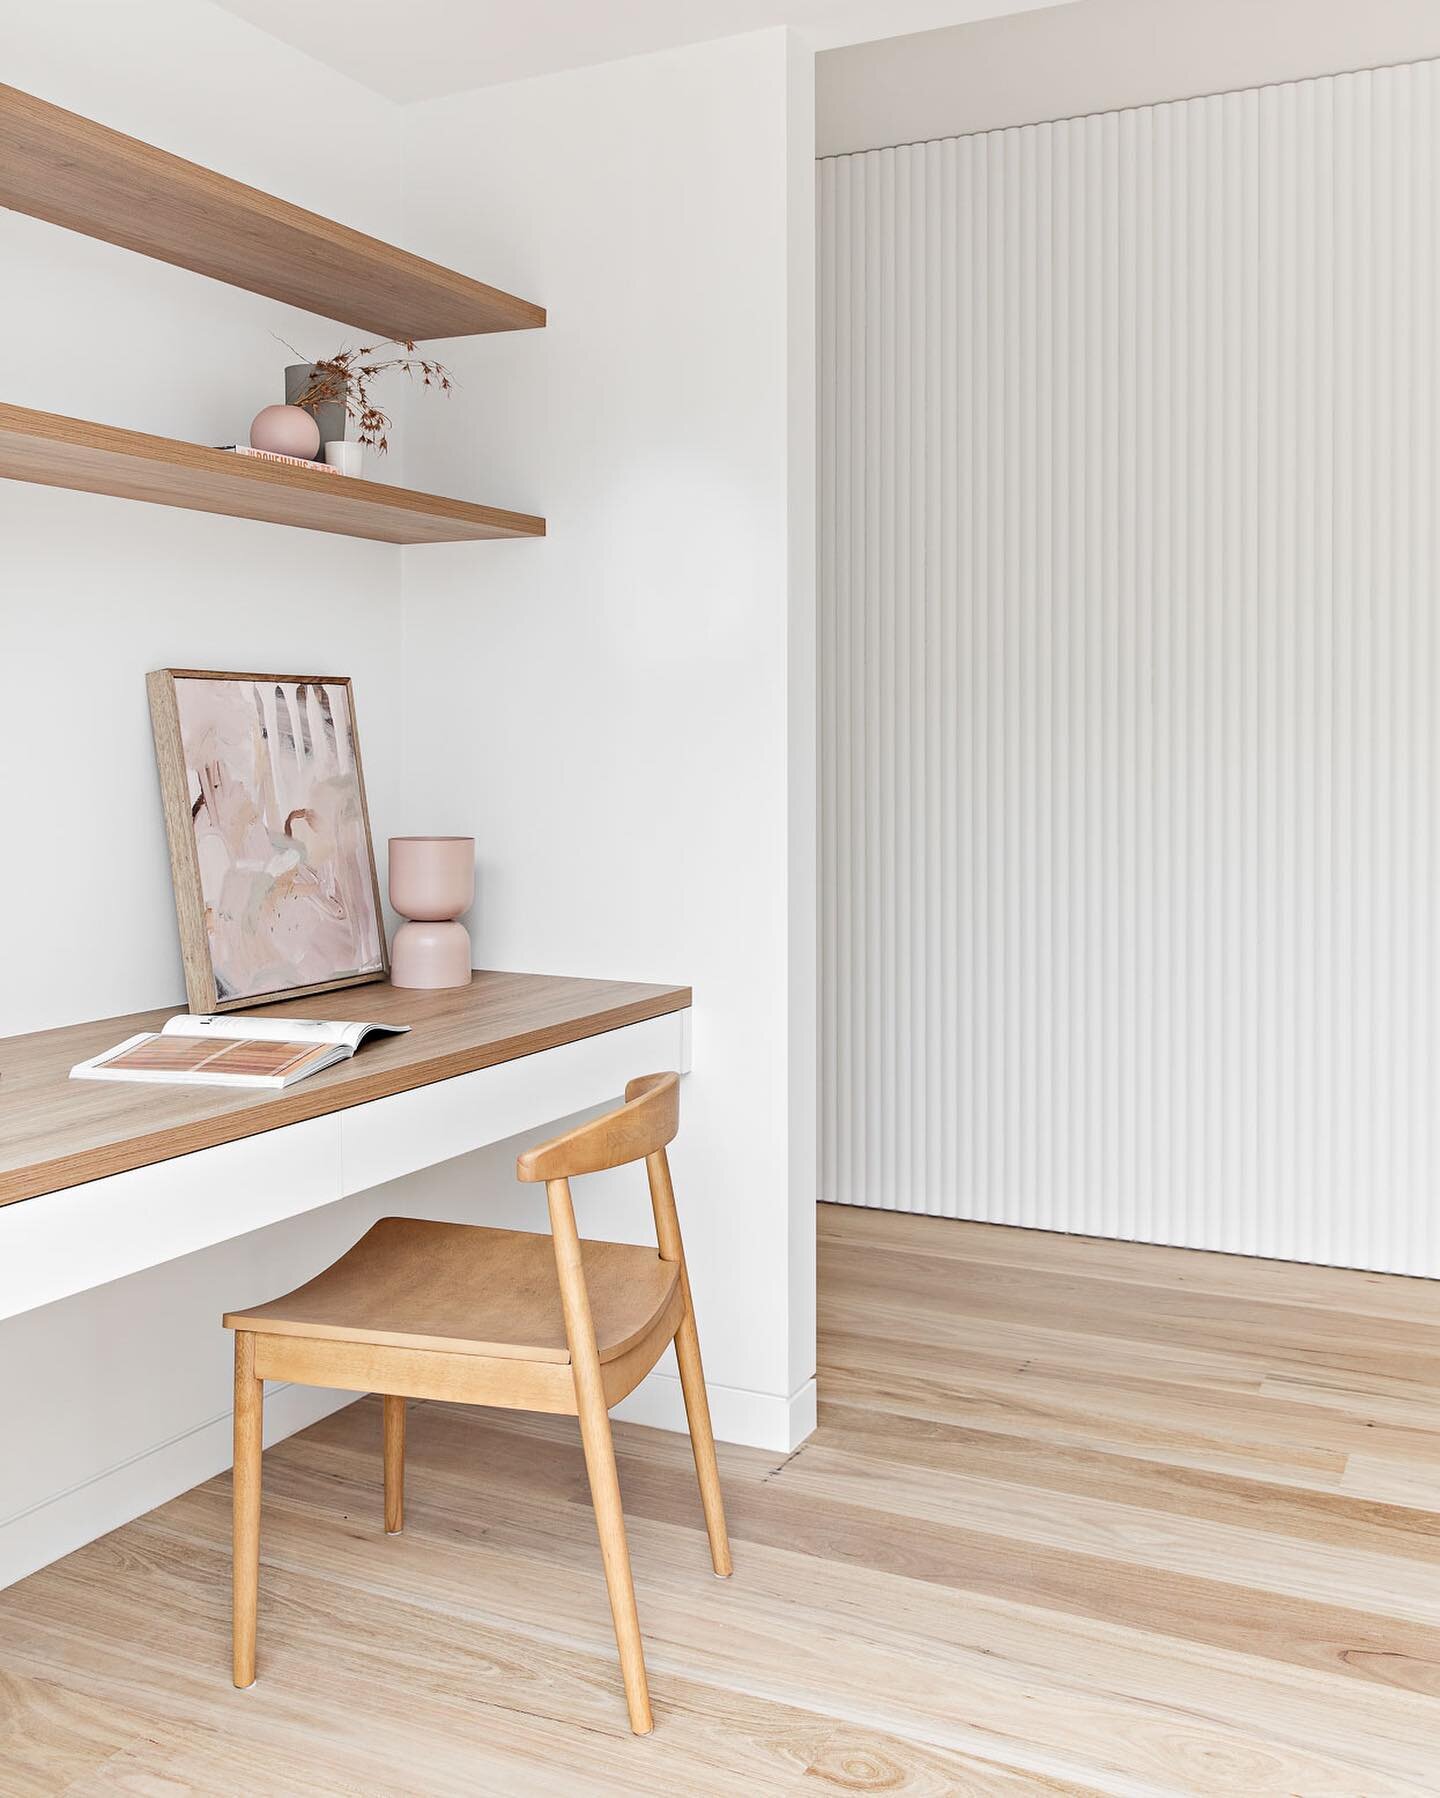 Creating a home office doesn't have to be a big and expensive task. Simple and practical can still be stylish ❤️

We have @polytec open shelves, an integrated drawer and a chair (x2).
Yes two identical study nooks opposite each other. One clean side 